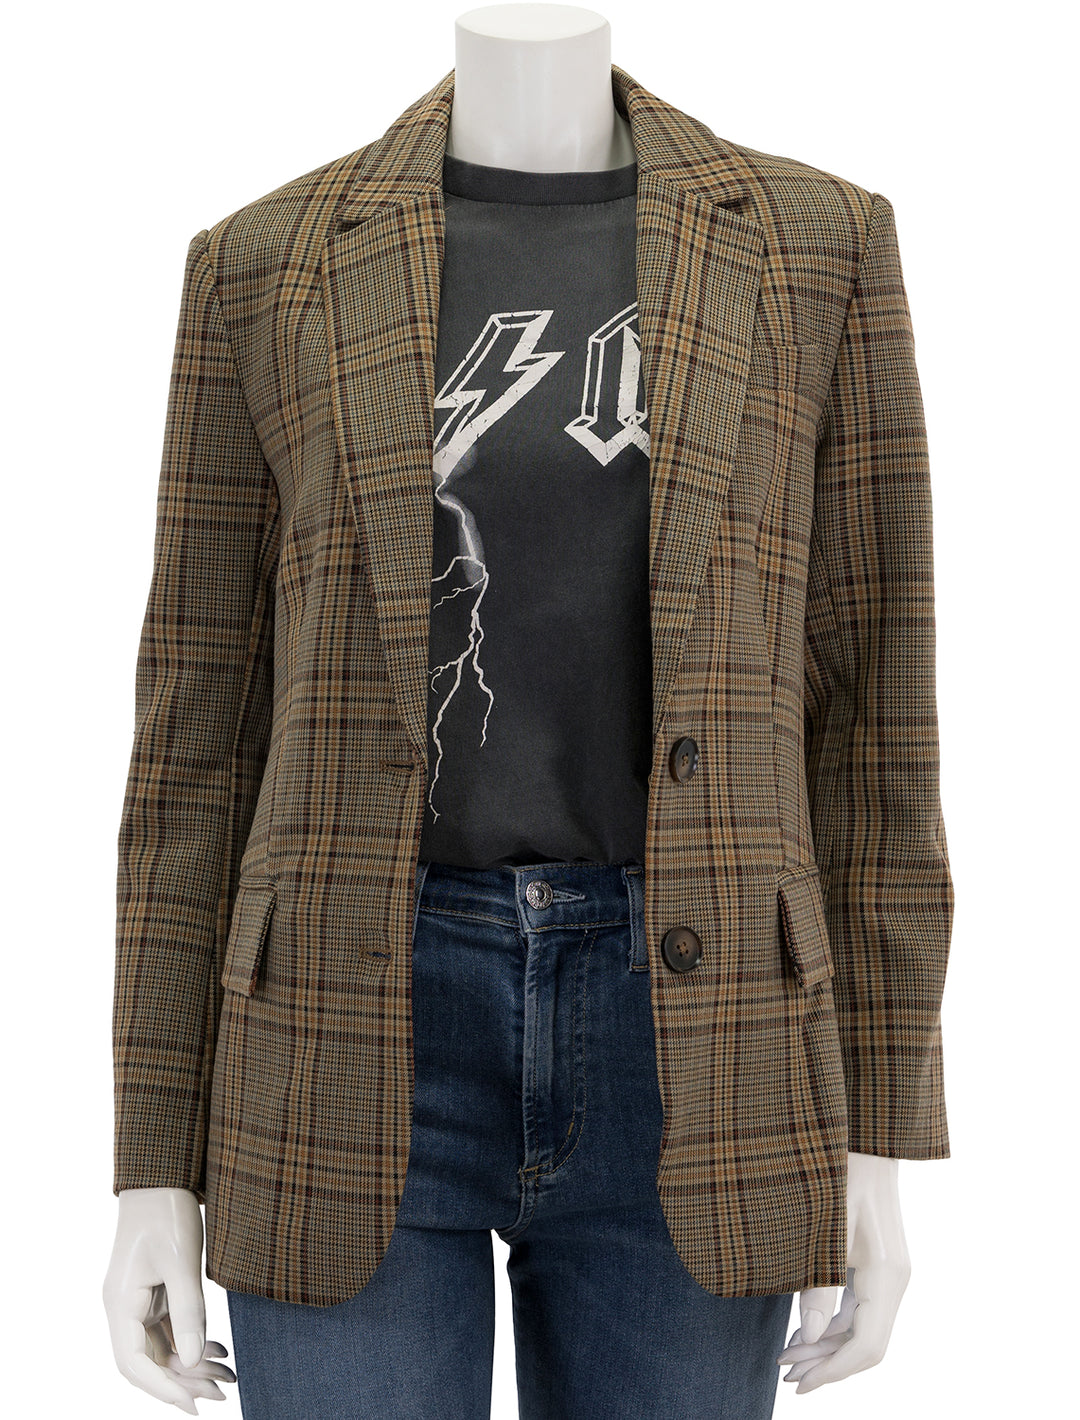 Front view of English Factory's oversized check blazer in brown, unbuttoned.